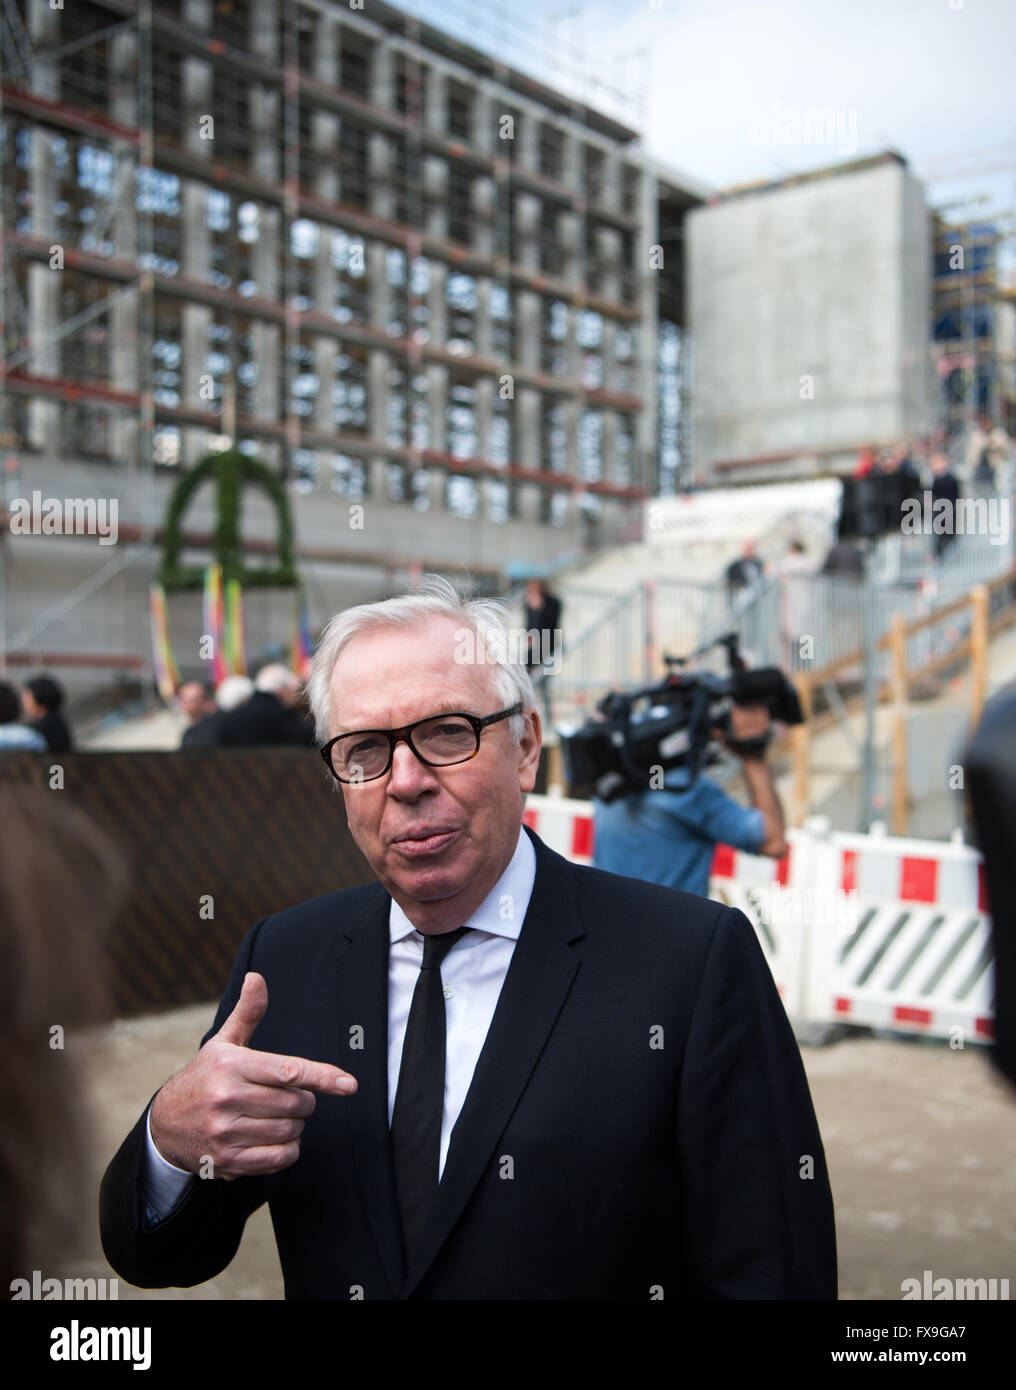 British architect David Chipperfield attends the roofing ceremony of the new entrance building of the 'Berlin Museum Island', the James-Simon-Galerie, in Berlin, Germany, 134 April 2016. The building which was designed by Chipperfield serves as a central access to the five museums on the island. PHOTO: BERND VON JUTRCZENKA/dpa Stock Photo